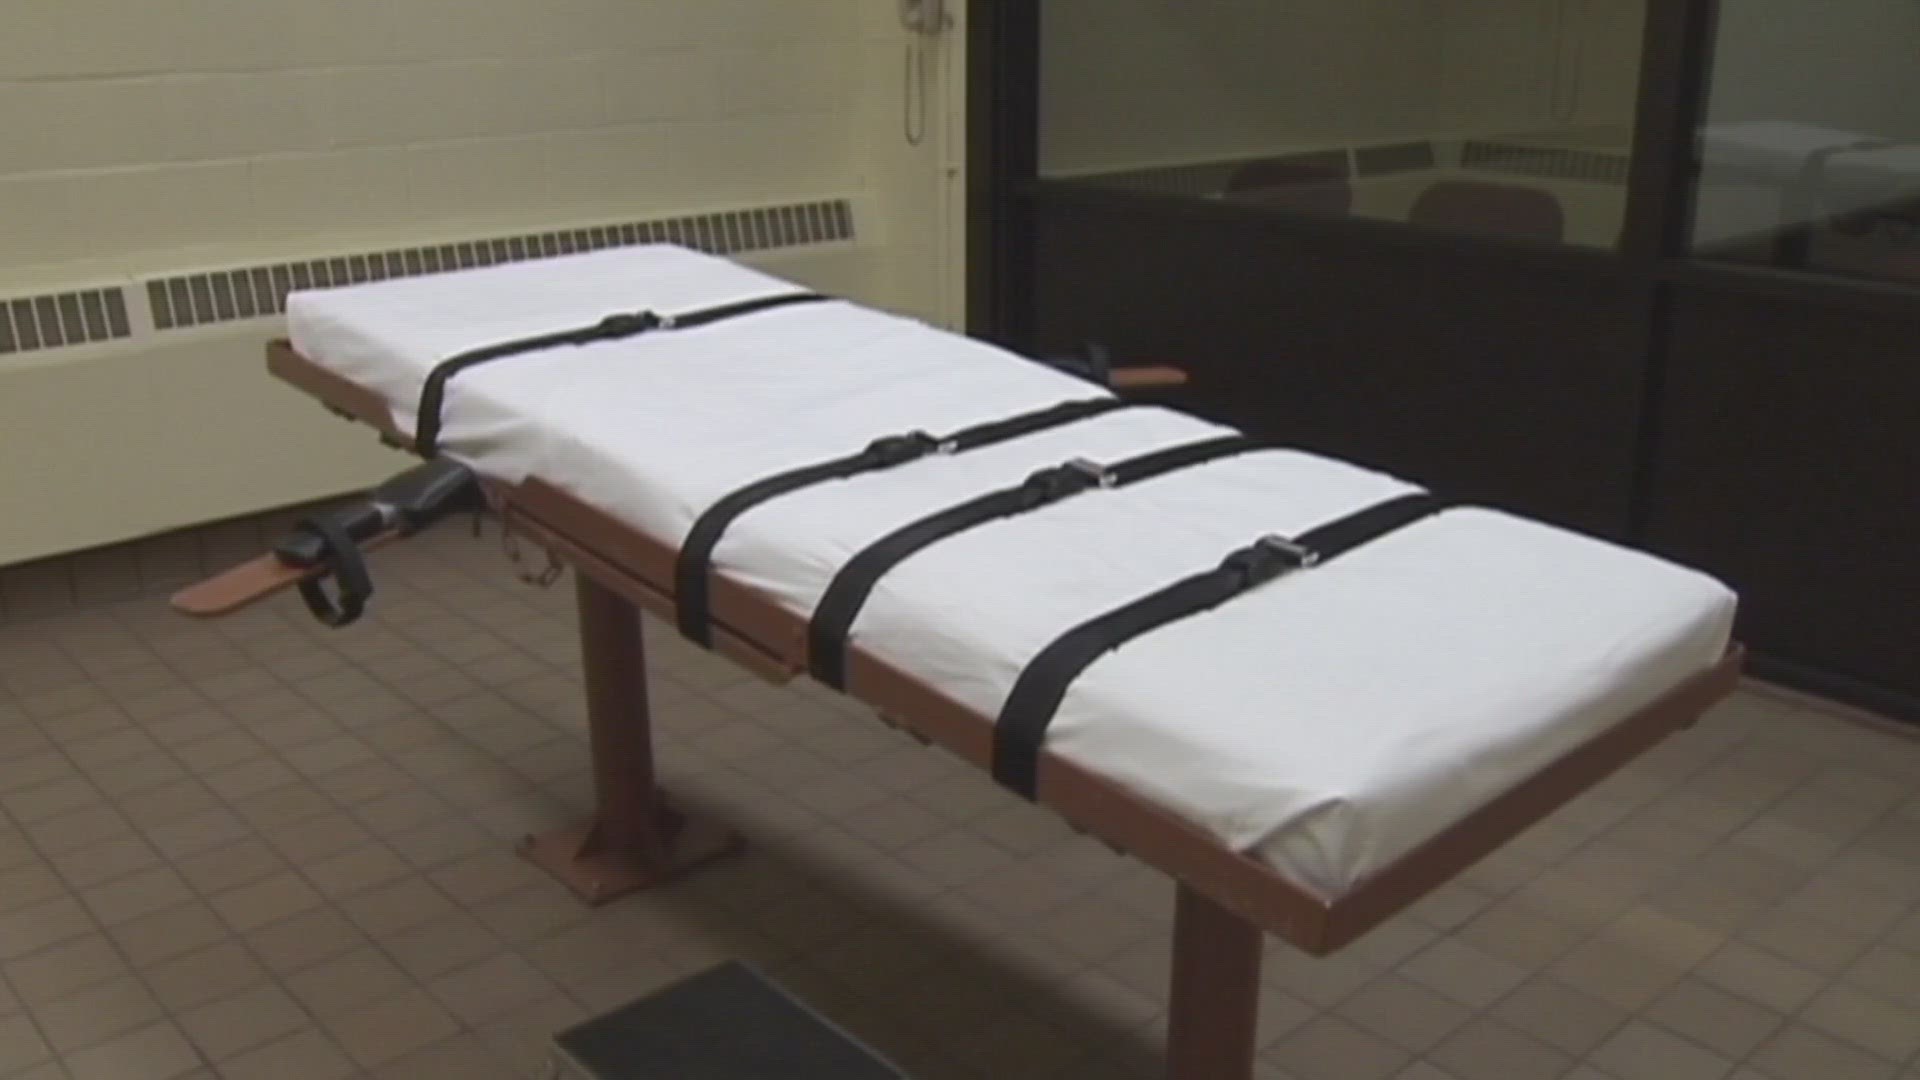 Currently, Ohio has an unofficial moratorium on capital punishment, after Gov. Mike DeWine instructed lawmakers to find an alternative method to lethal injection.